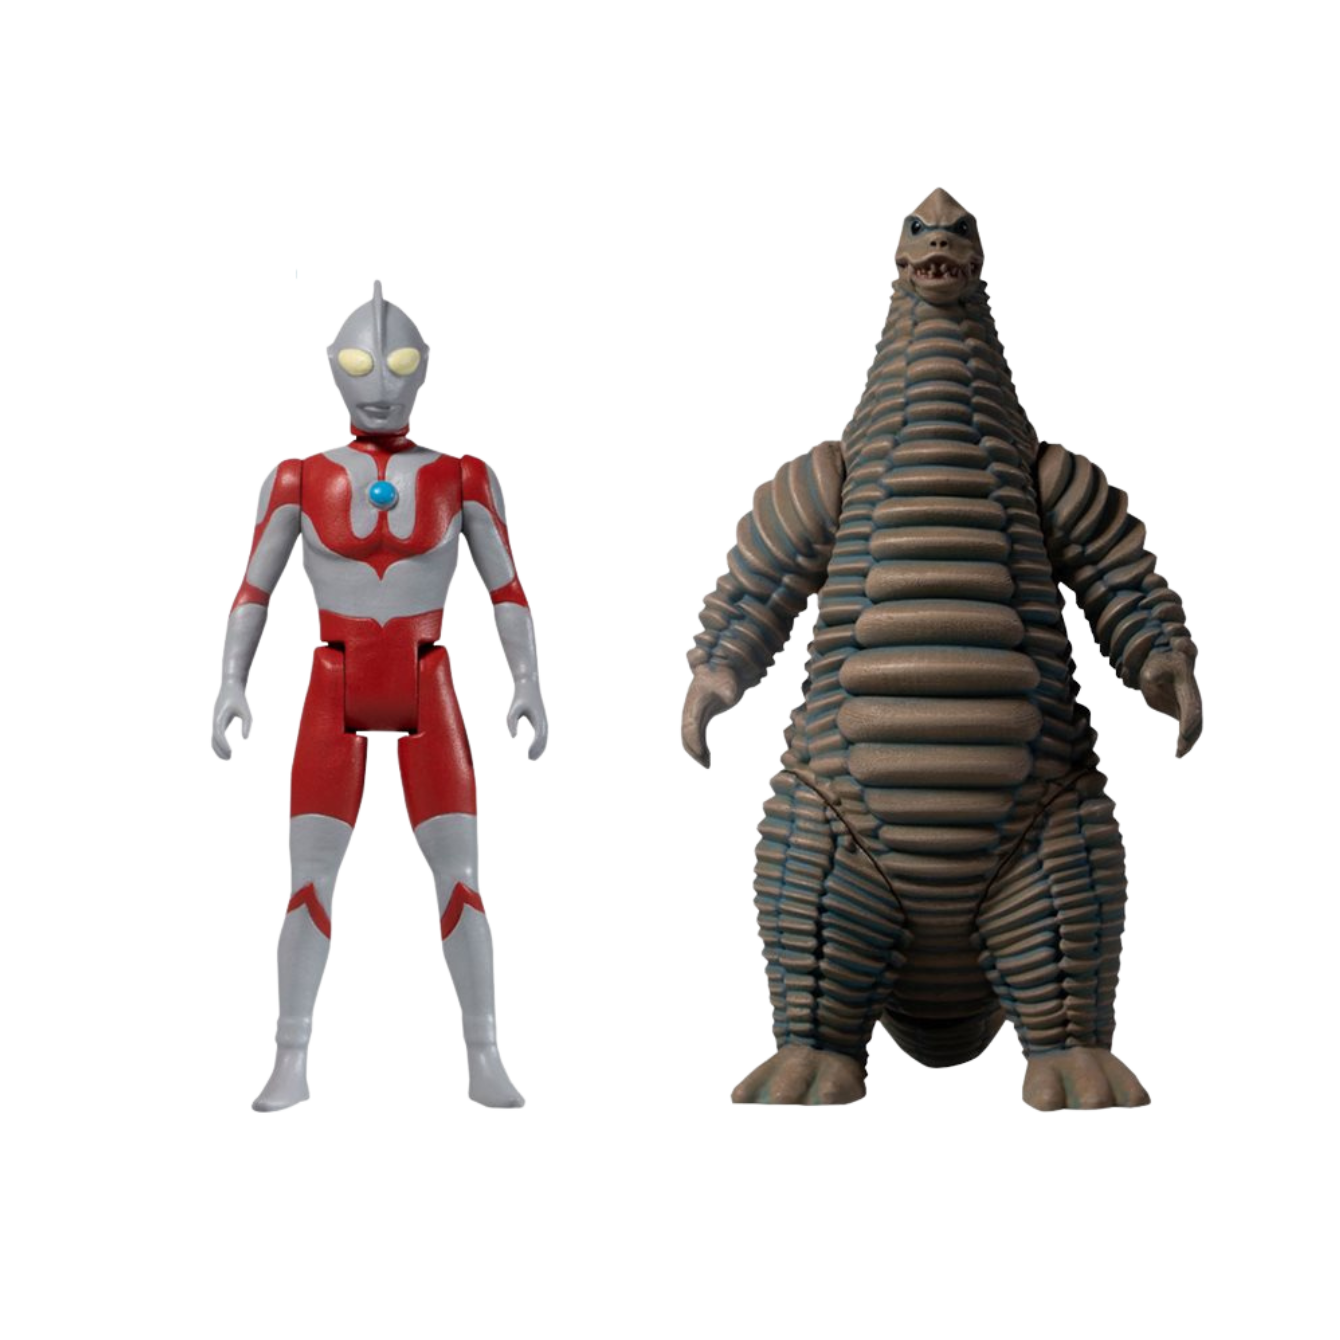 Ultraman and Red King Boxed Set